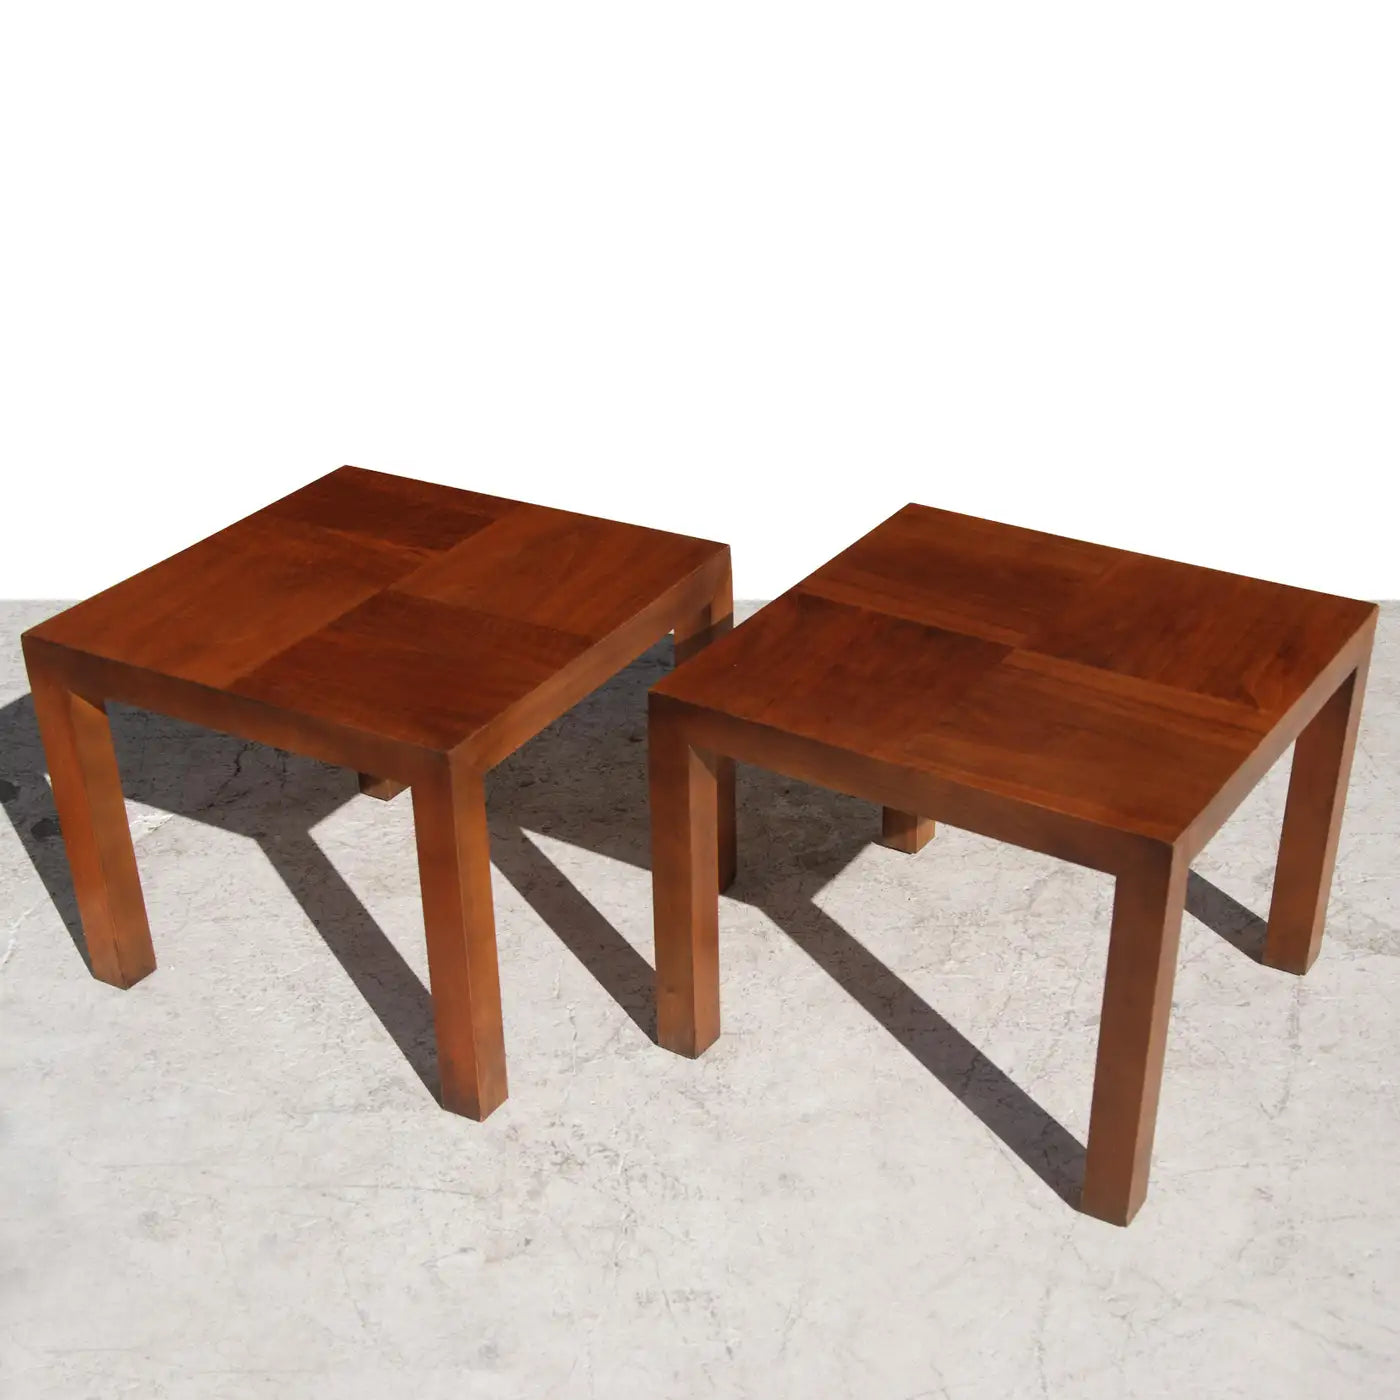 Two Square Walnut End Tables by Lane Furniture.